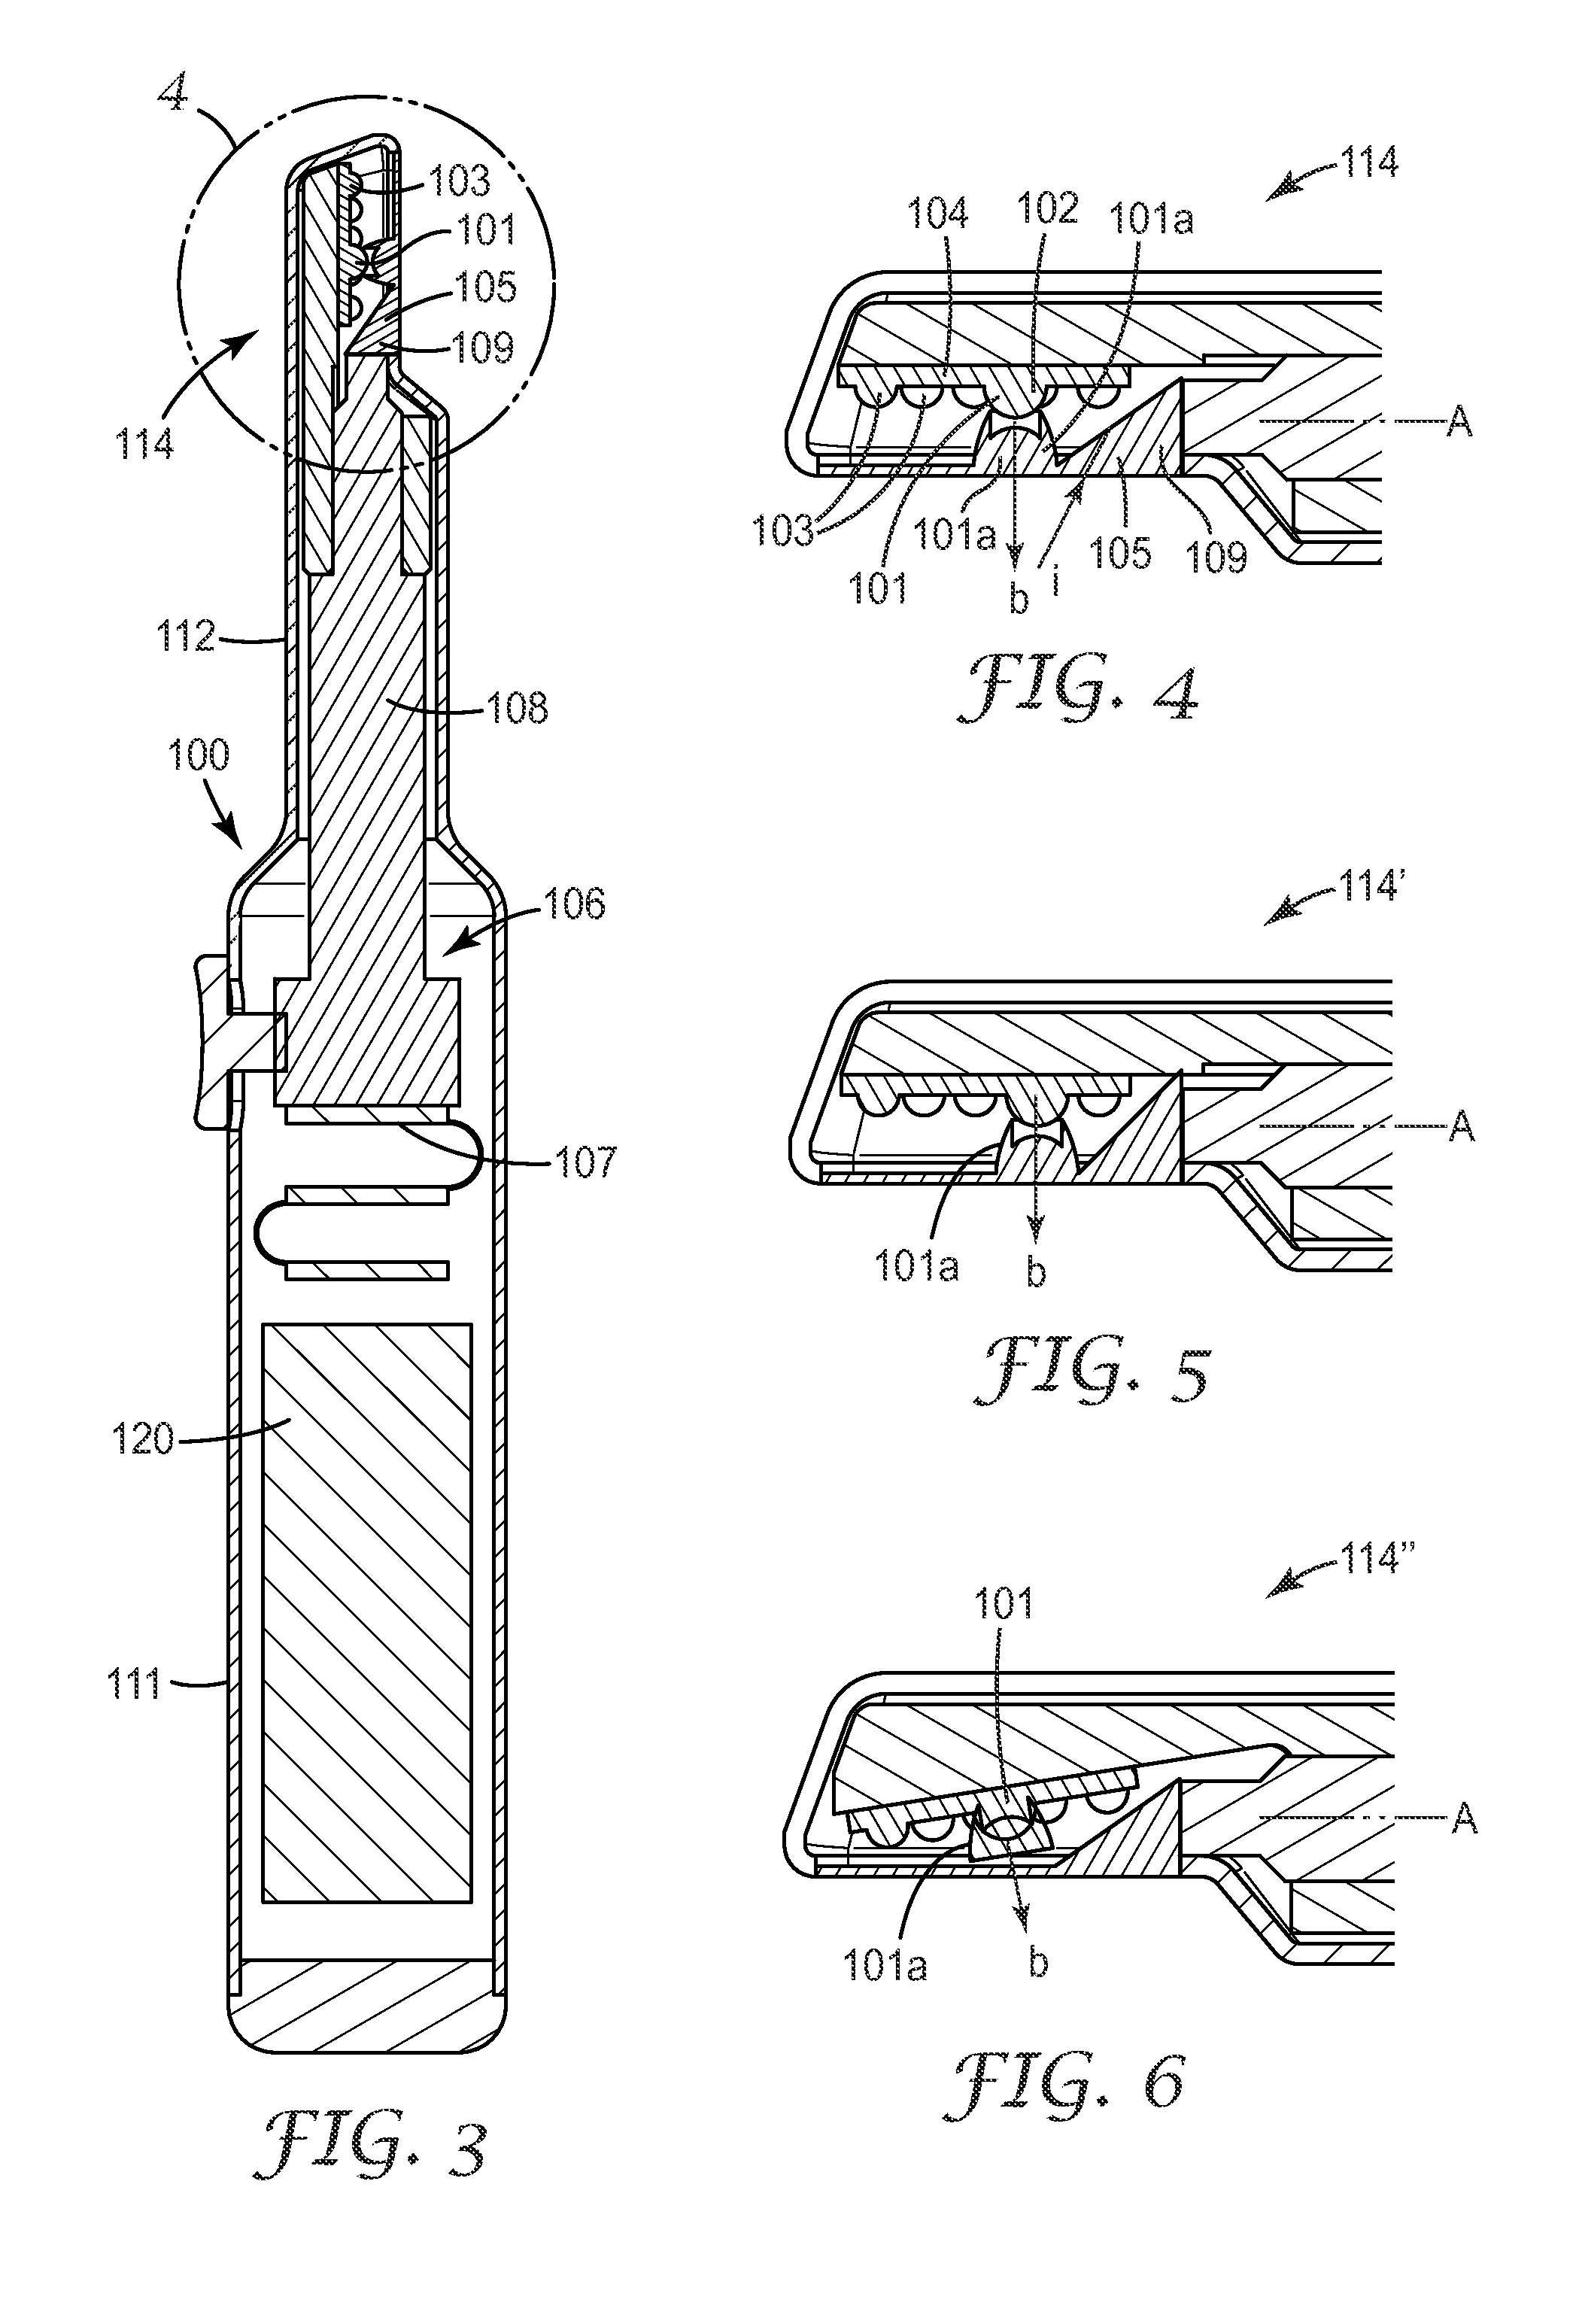 Dental irradiation device and system